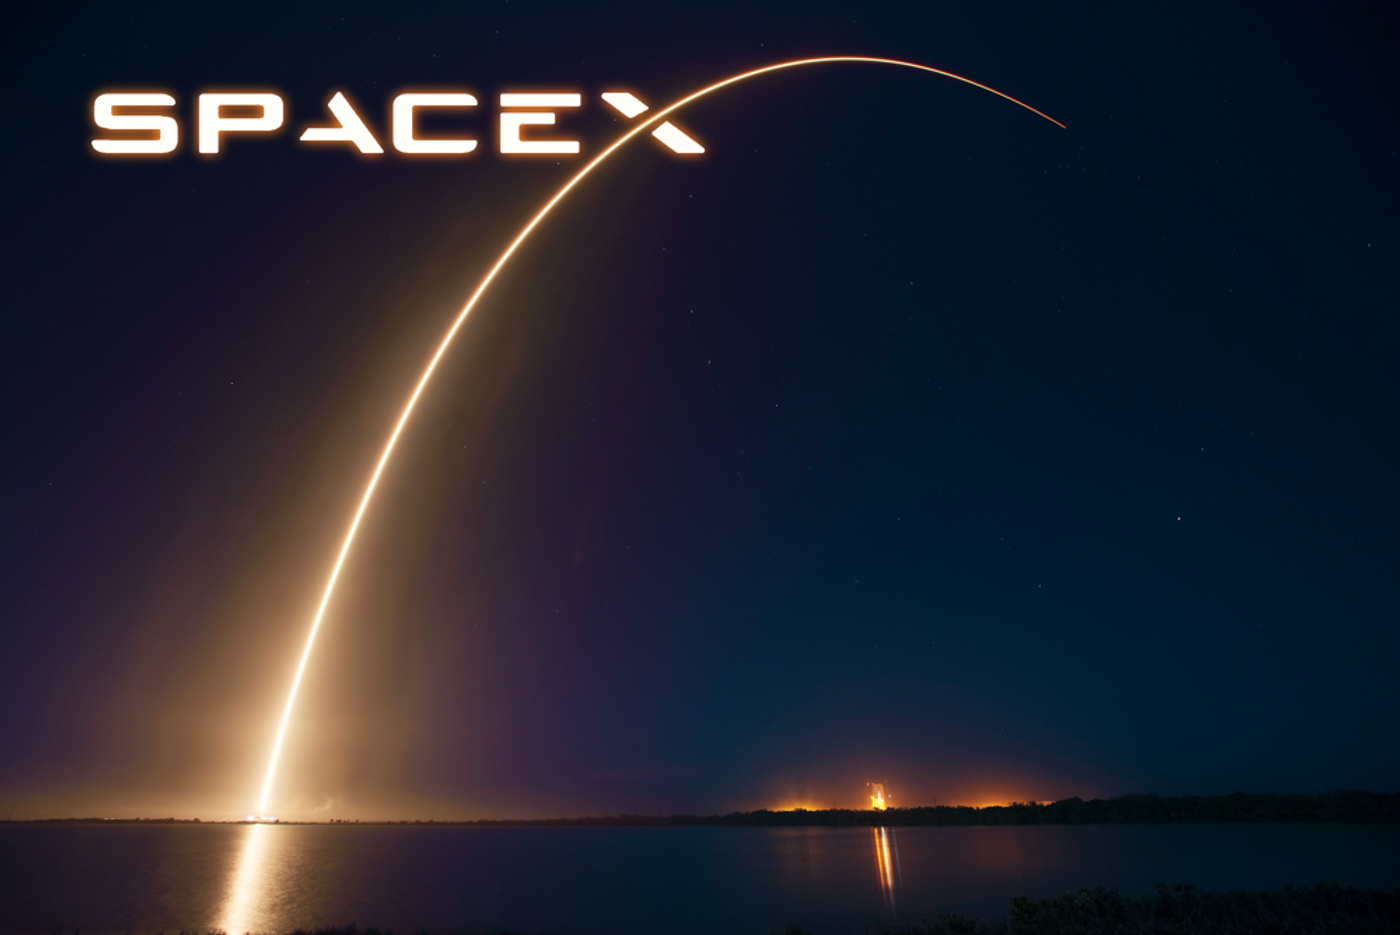 SpaceX was on a launch hiatus after a Falcon 9 rocket exploded on the launch pad, but now they're planning to return to space flight this month.